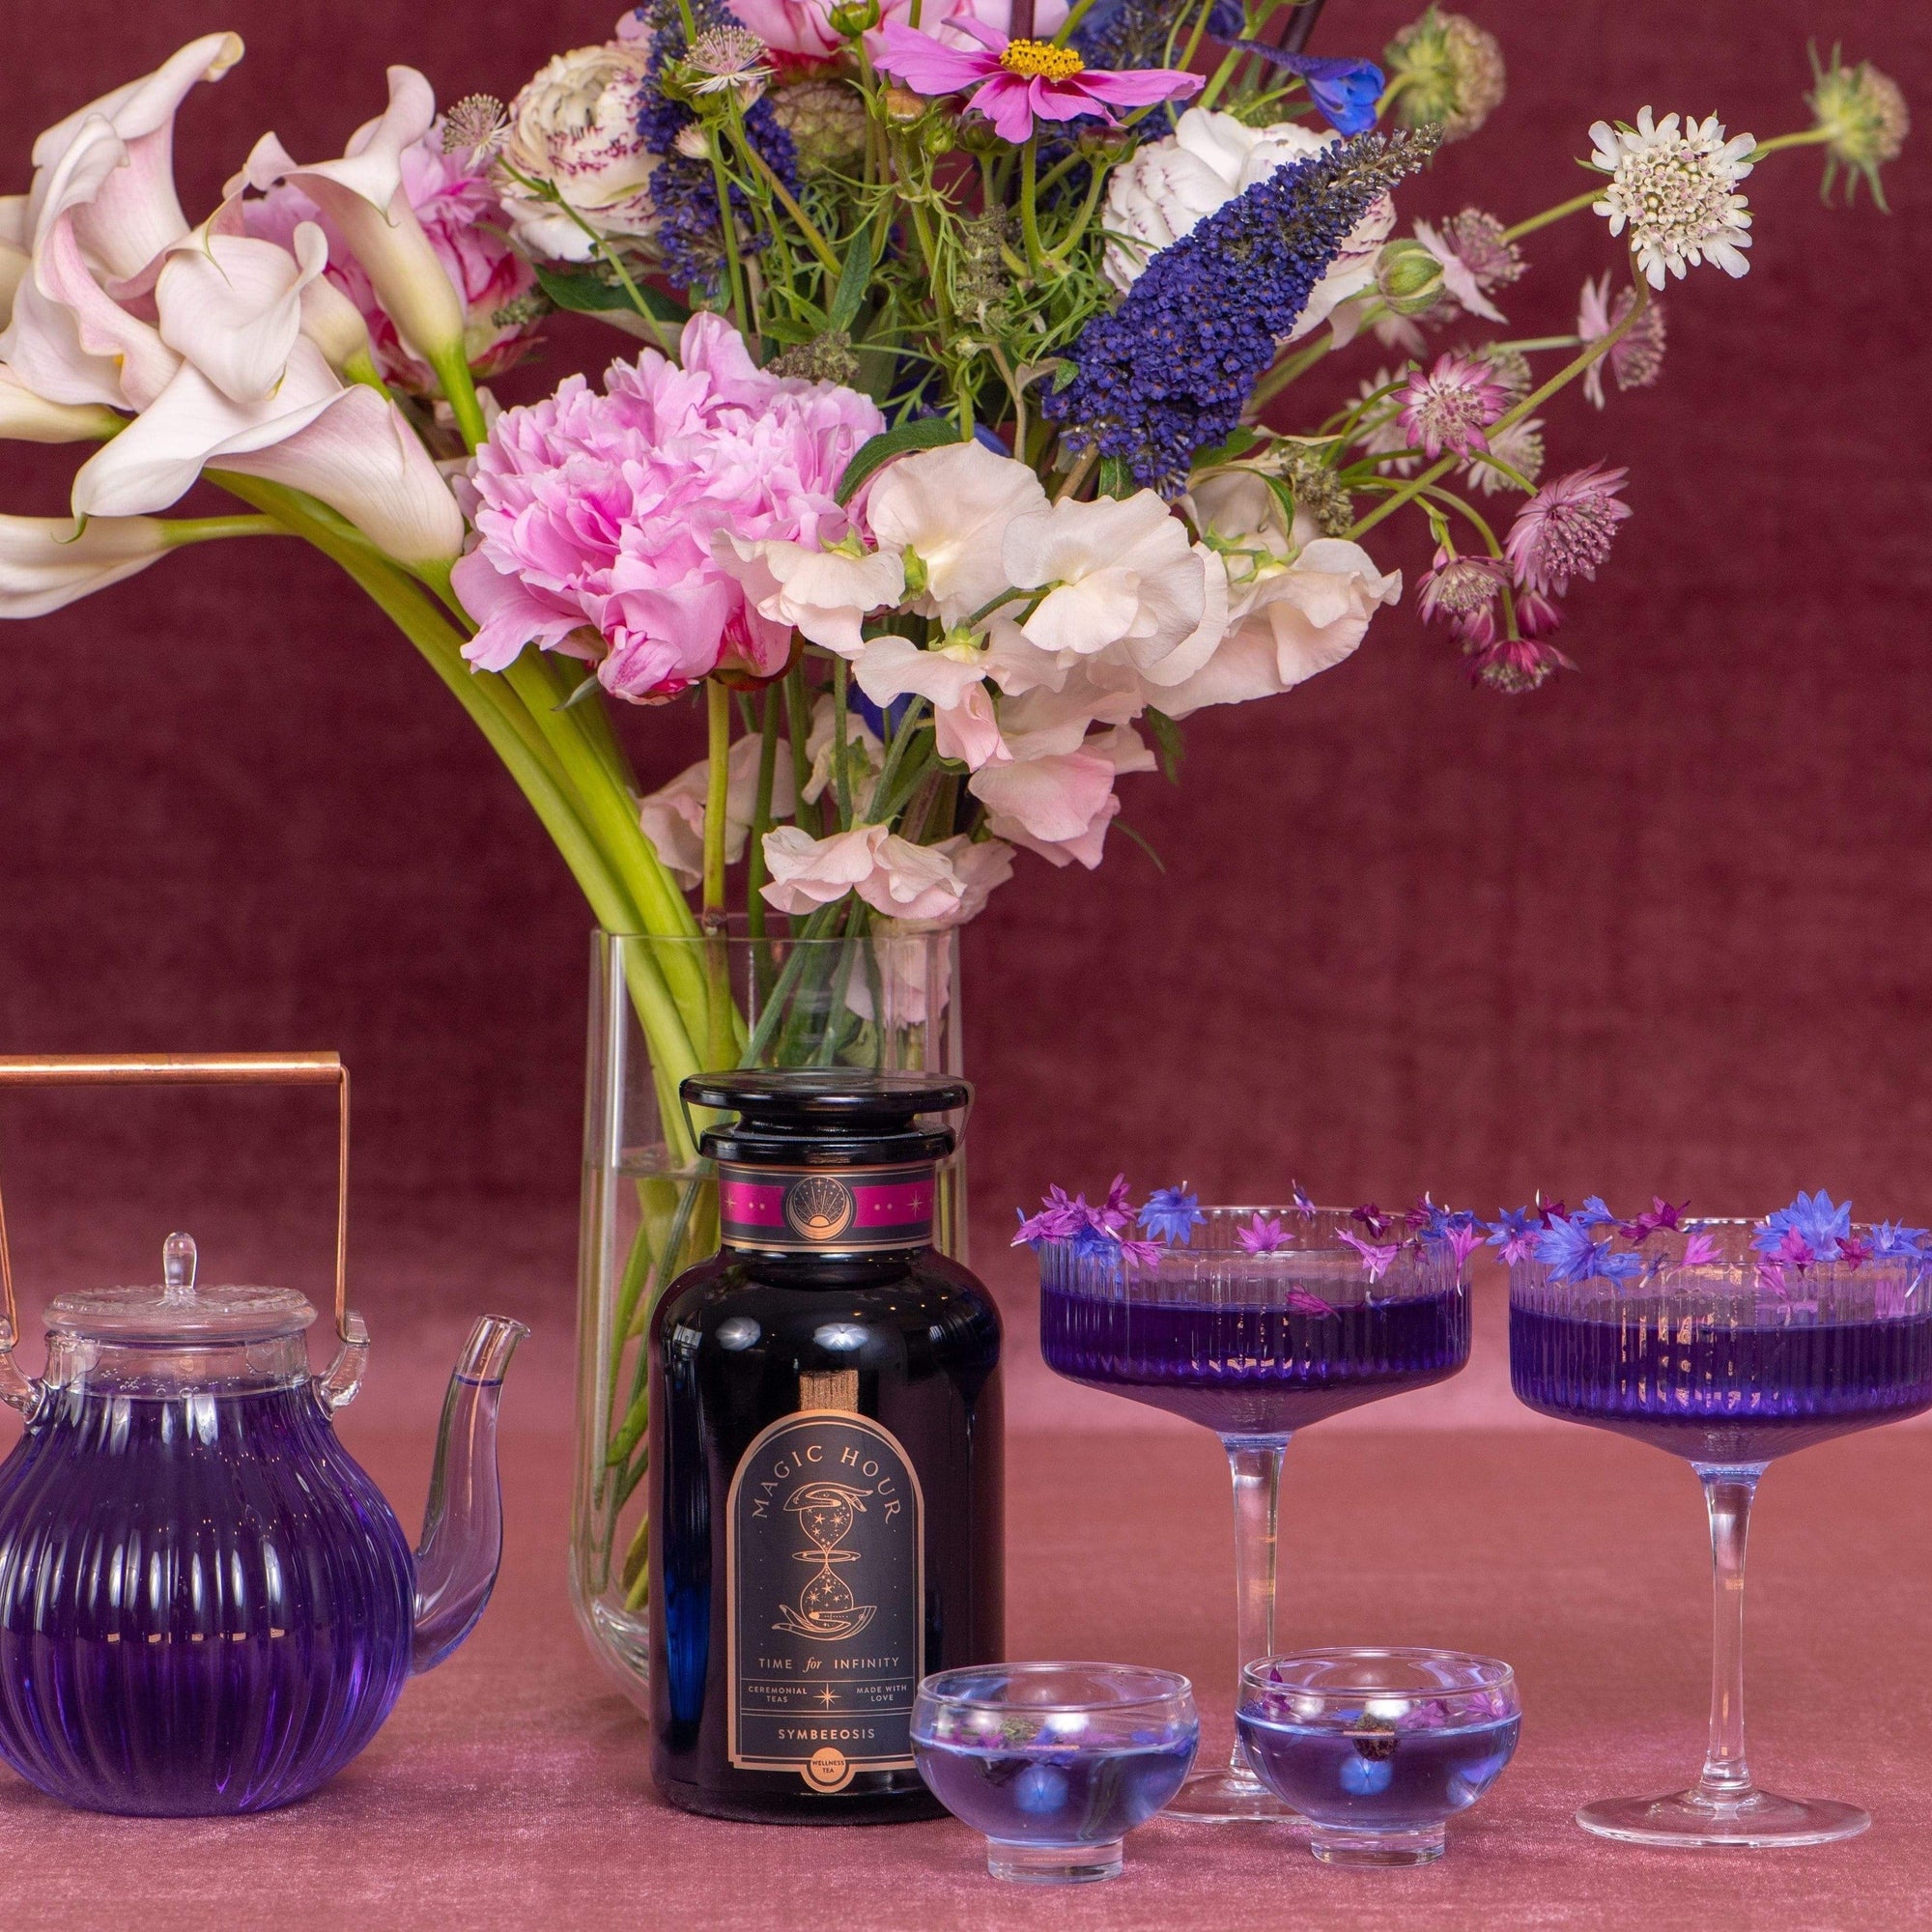 A vibrant setup featuring a dark bottle labeled "Symbeeosis: Beautifying Immunitea for the Queen Bee" from Magic Hour, a purple teapot of loose leaf tea, two purple-tinted glasses with a floral garnish, and a vase of diverse flowers including white lilies and pink peonies, arranged against a rich, burgundy background.